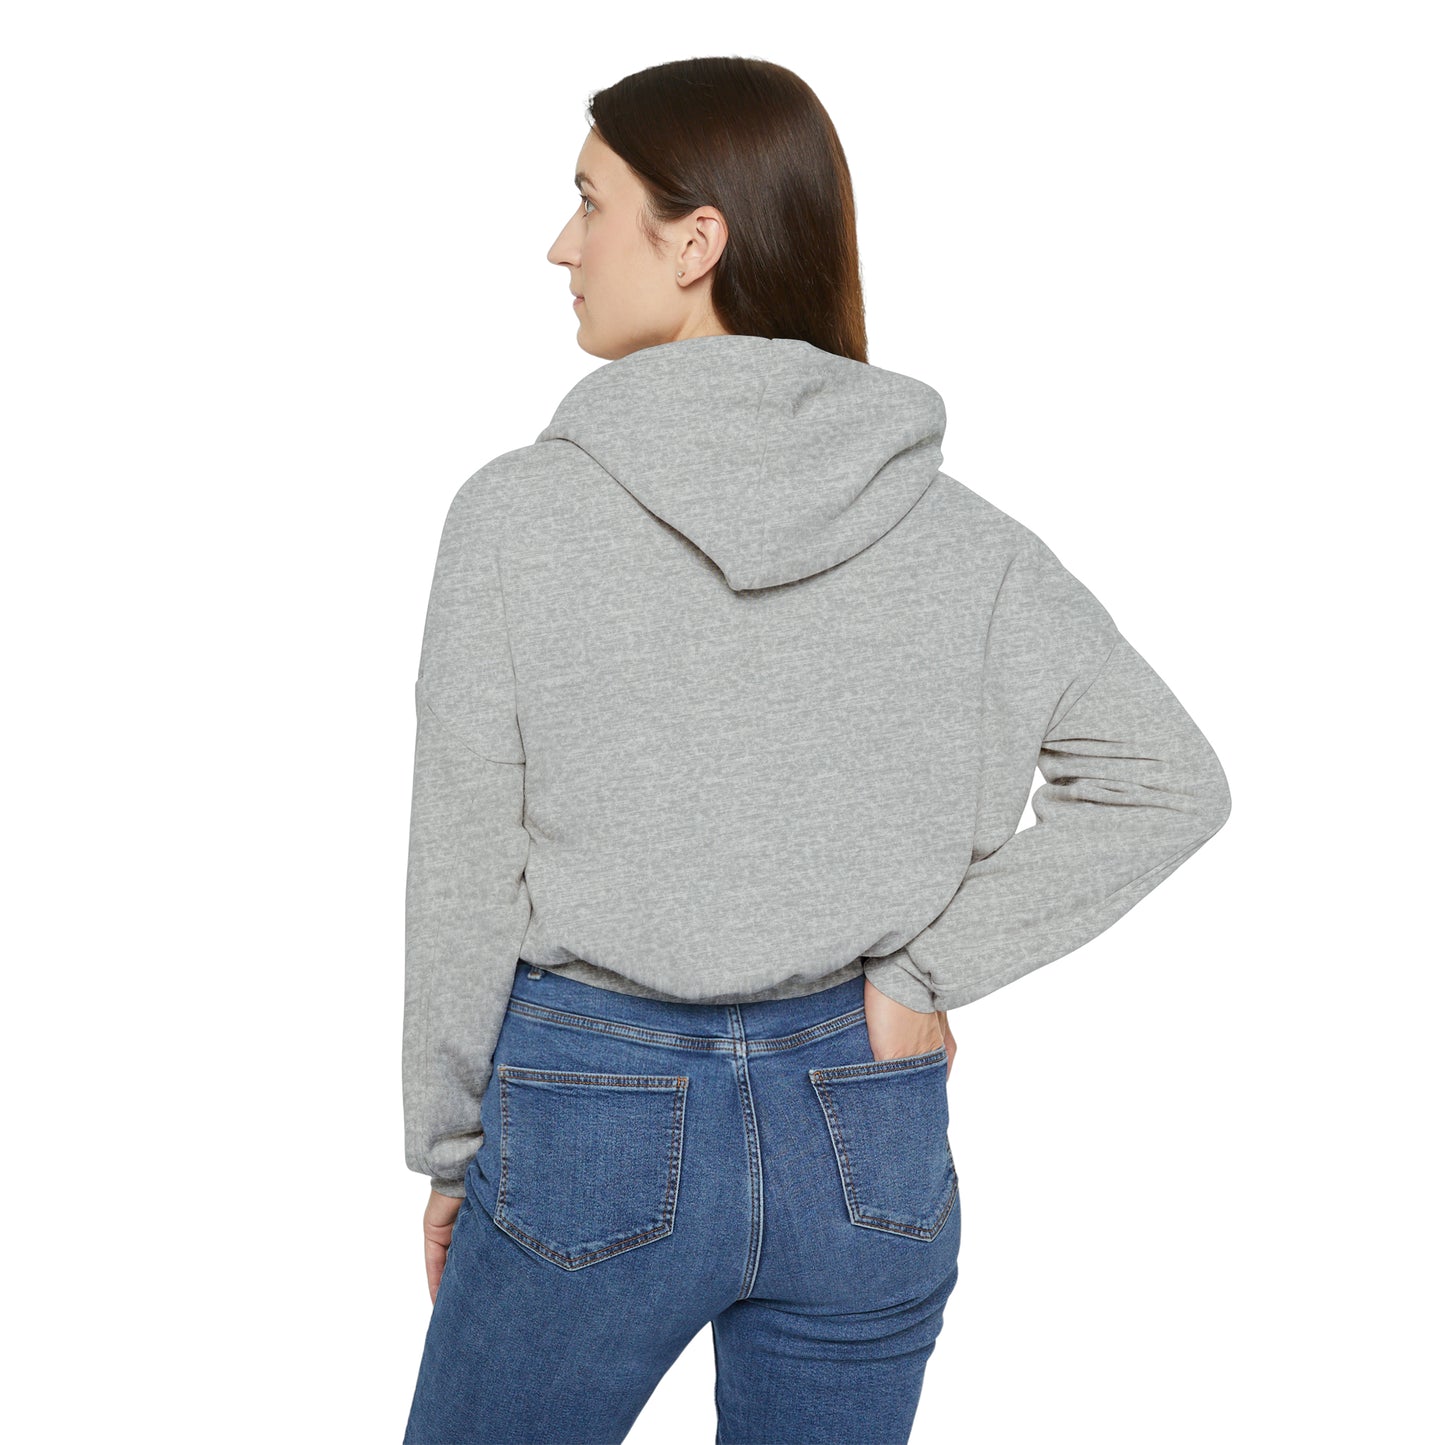 Ice Cube Starry Night Women's Cinched Bottom Hoodie